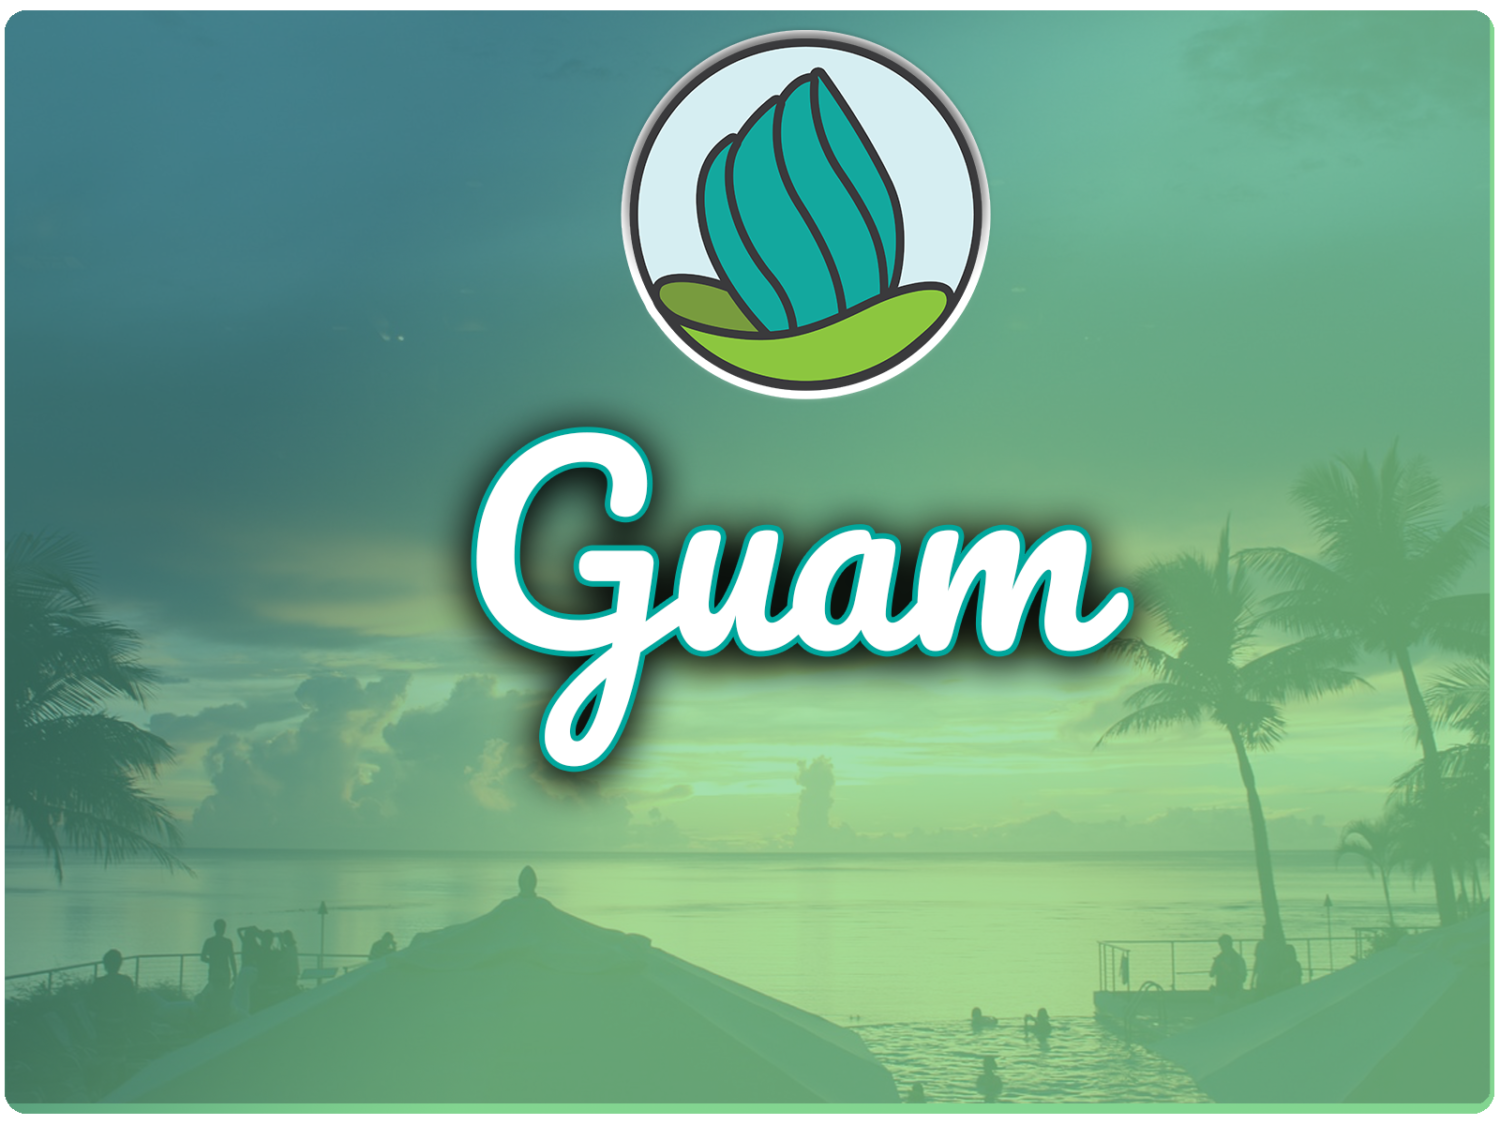 This image shows a water area with people relaxing in it. In the top center, there is the logo of NDC and below there is the text " Guam"